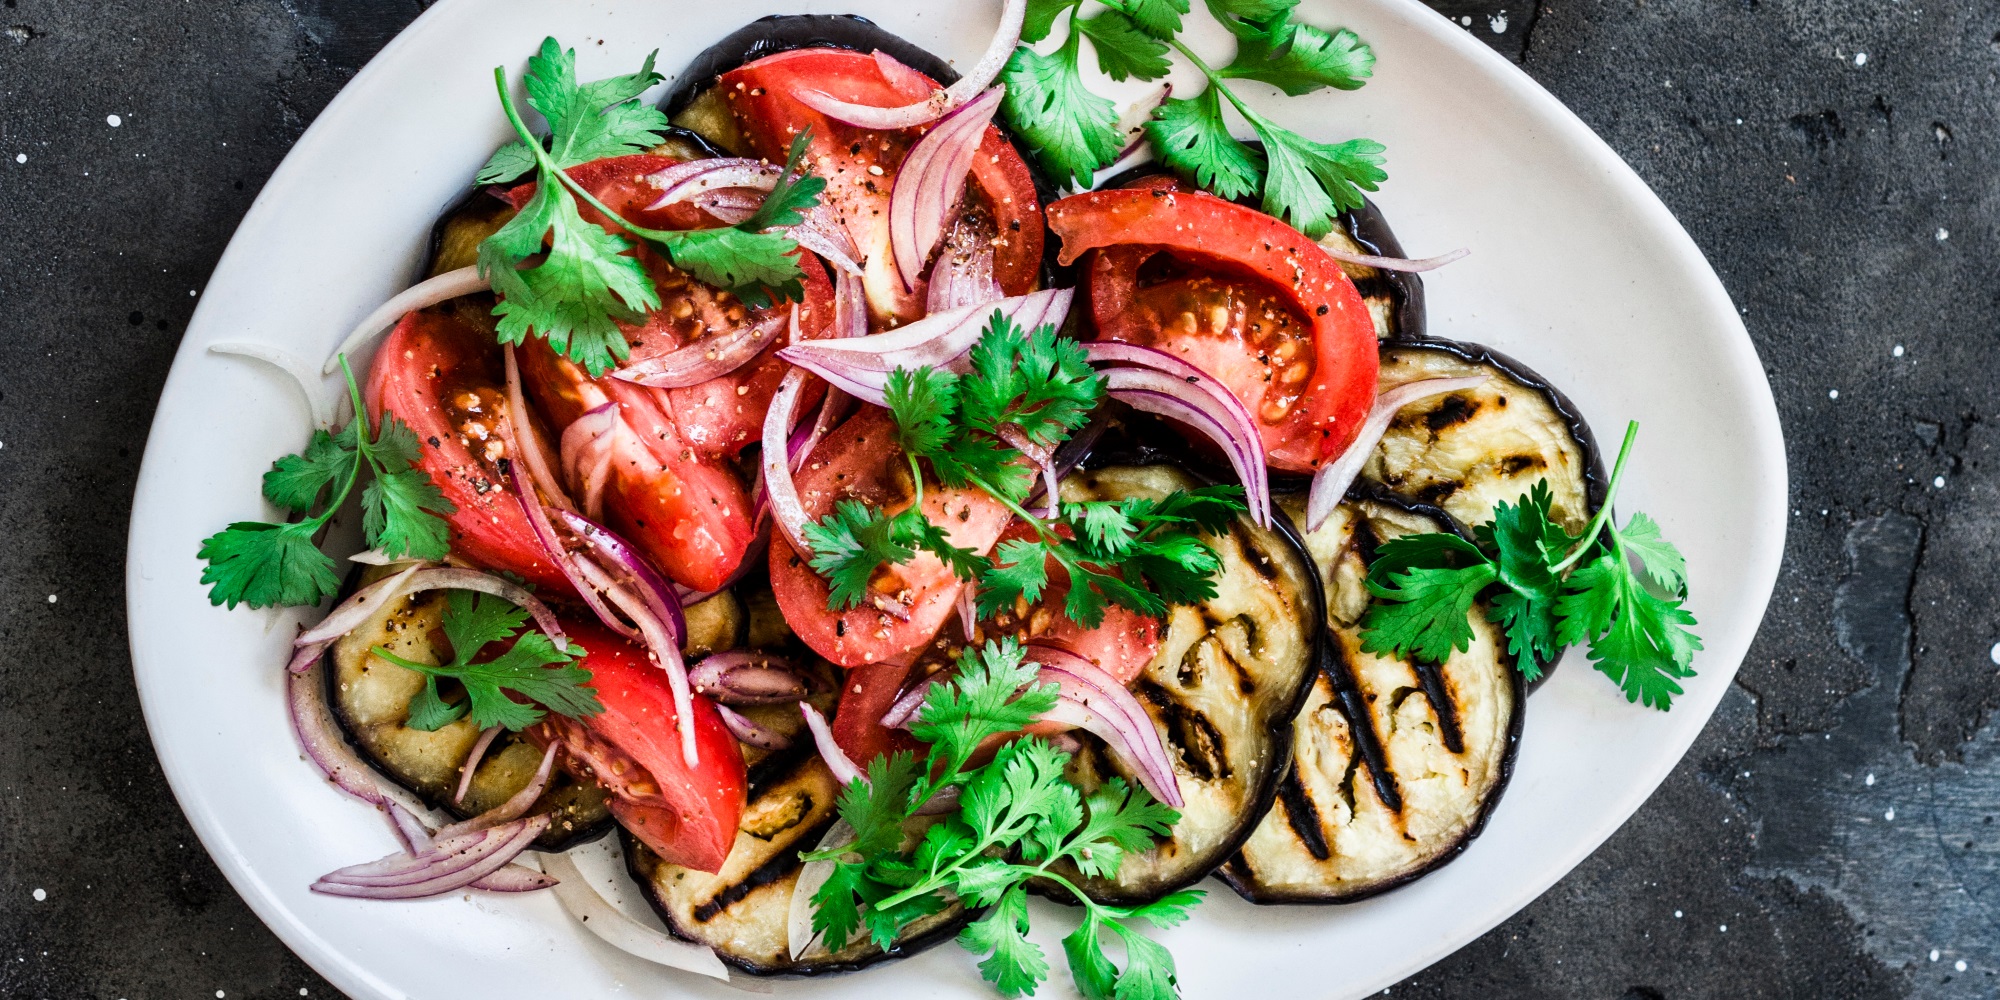 Baked eggplant and tomatoes